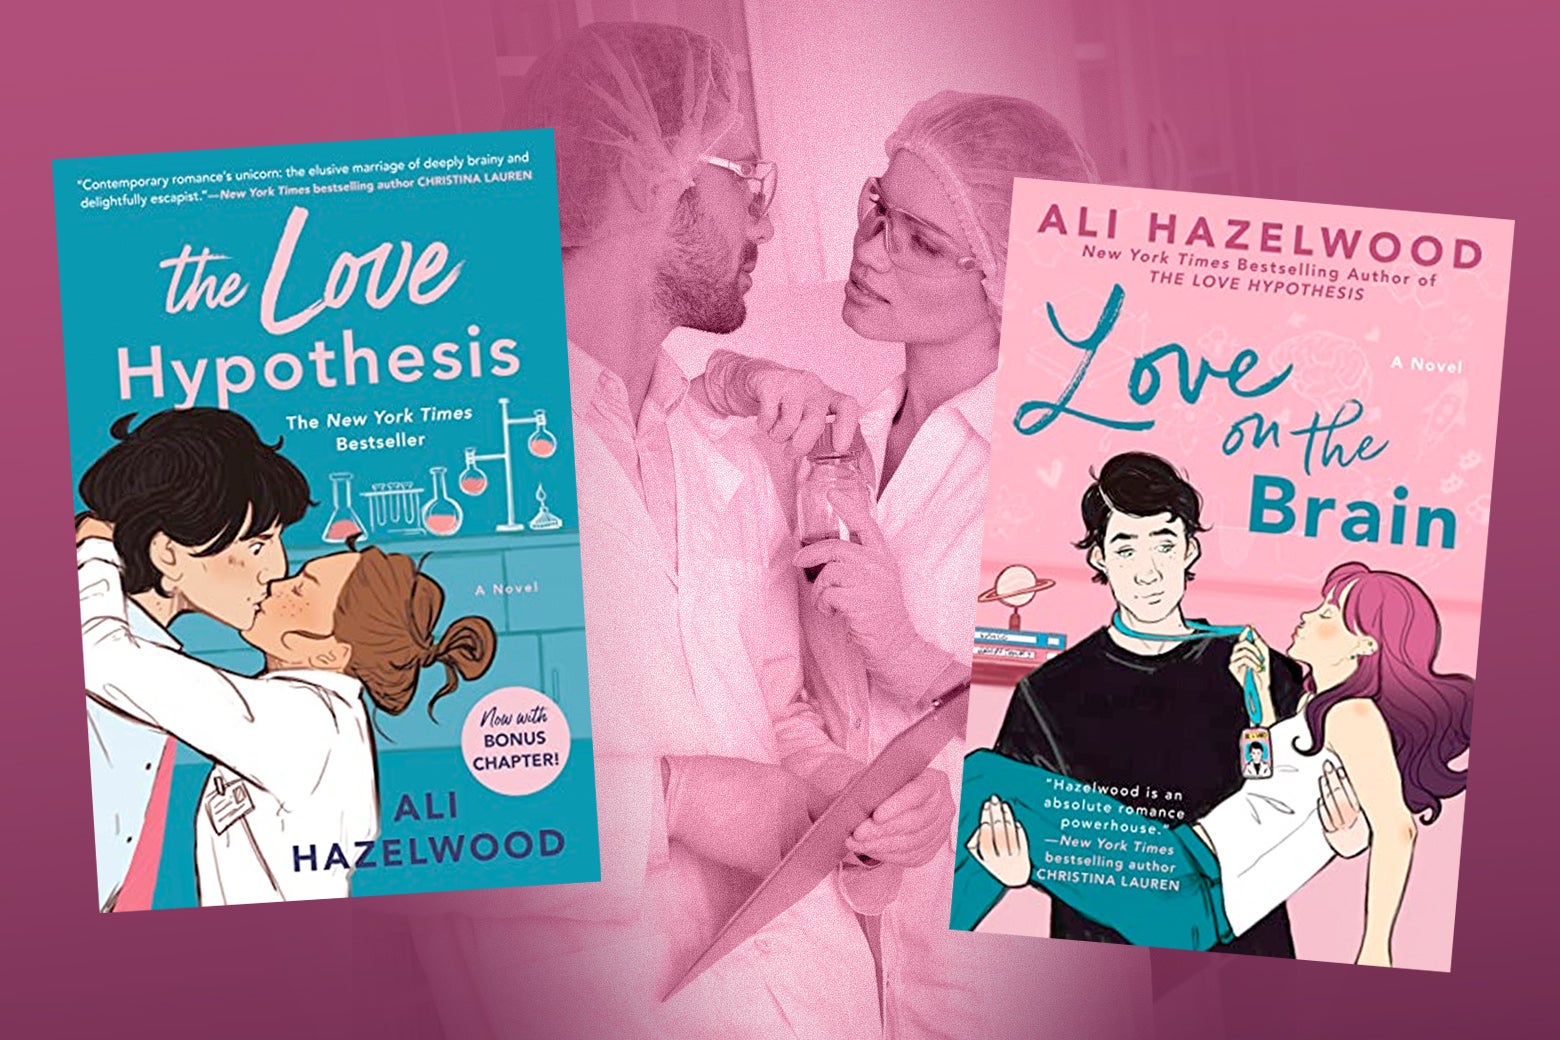 Ali Hazelwood's new book: Why people are snapping up her romance novels  about STEM.